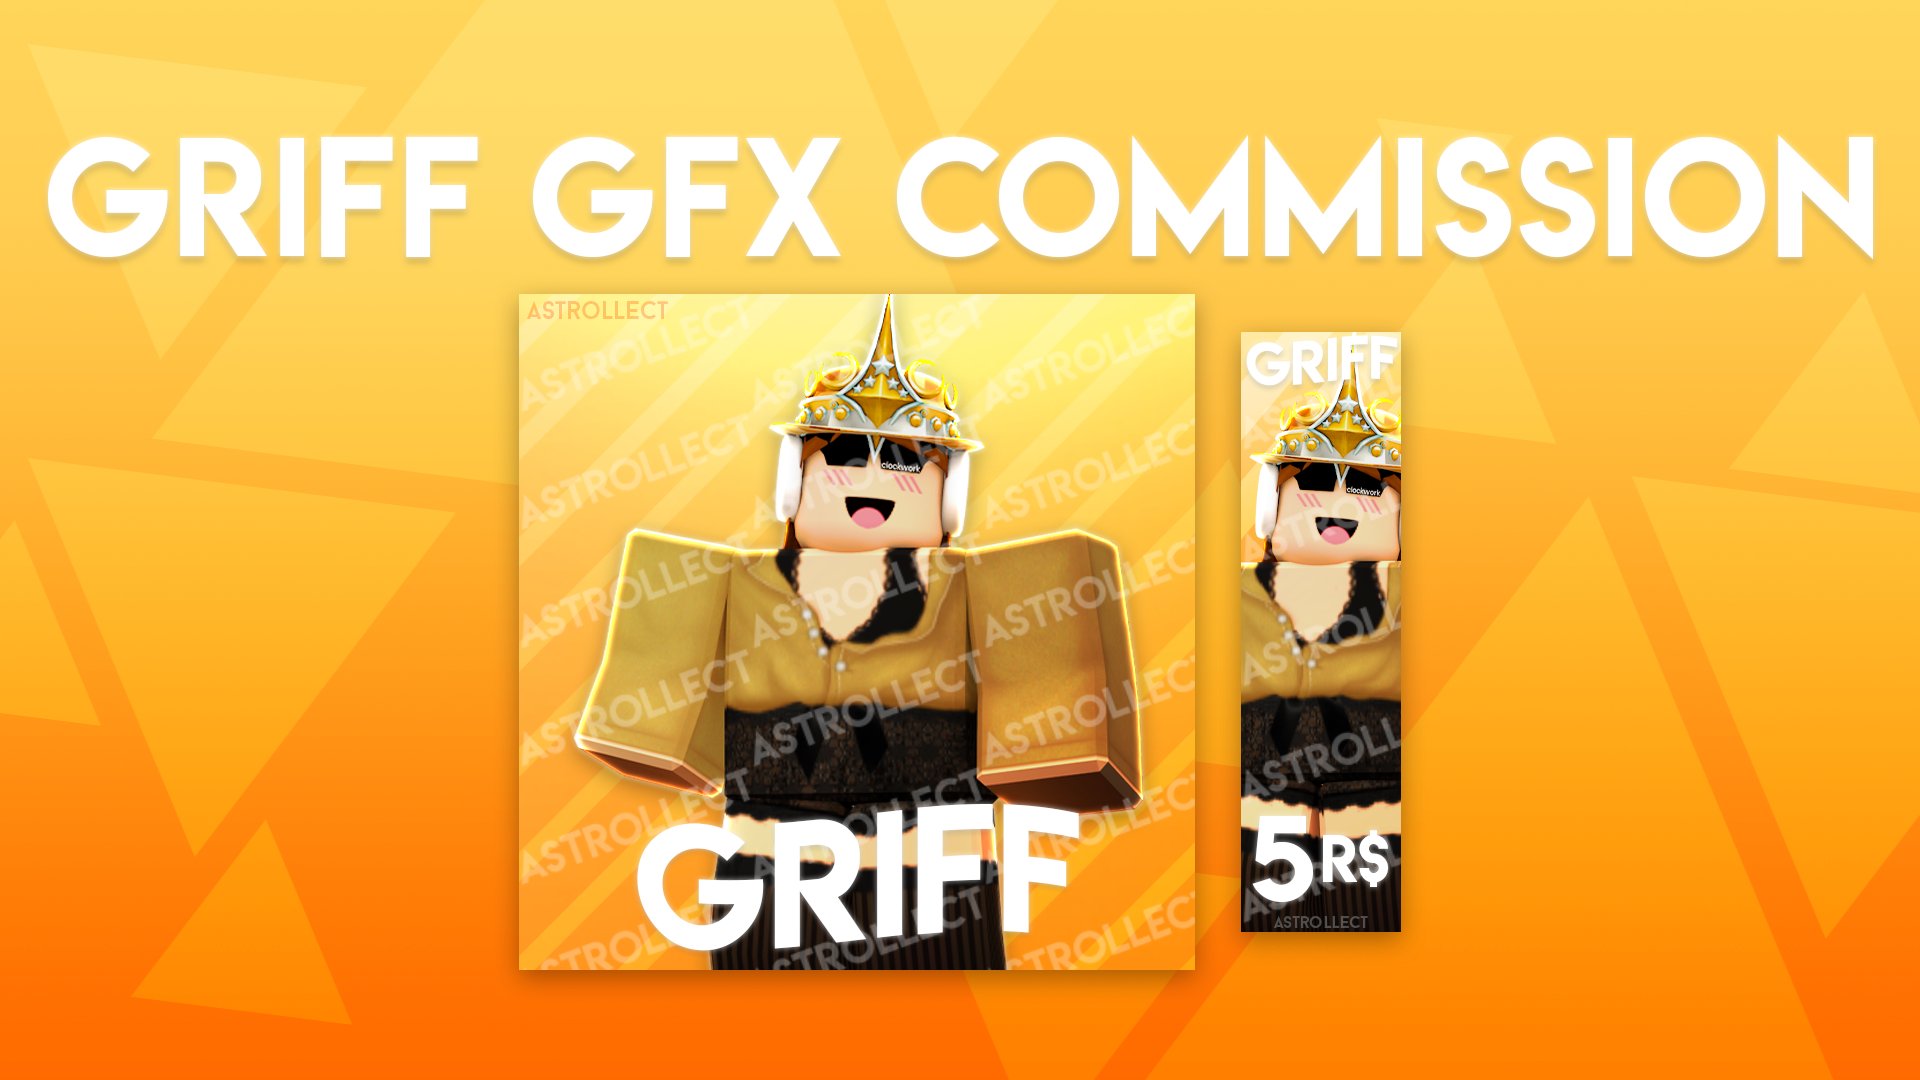 Astrollect On Twitter Group Gfx Commission For Griff Thanks For Commissioning Me Interested In Ordering Join My Gfx Discord Server To Order Https T Co 3djlsettjk Likes Retweets Appreciated Robloxdev Robloxgfx Roblox Https T Co - gfx roblox discord